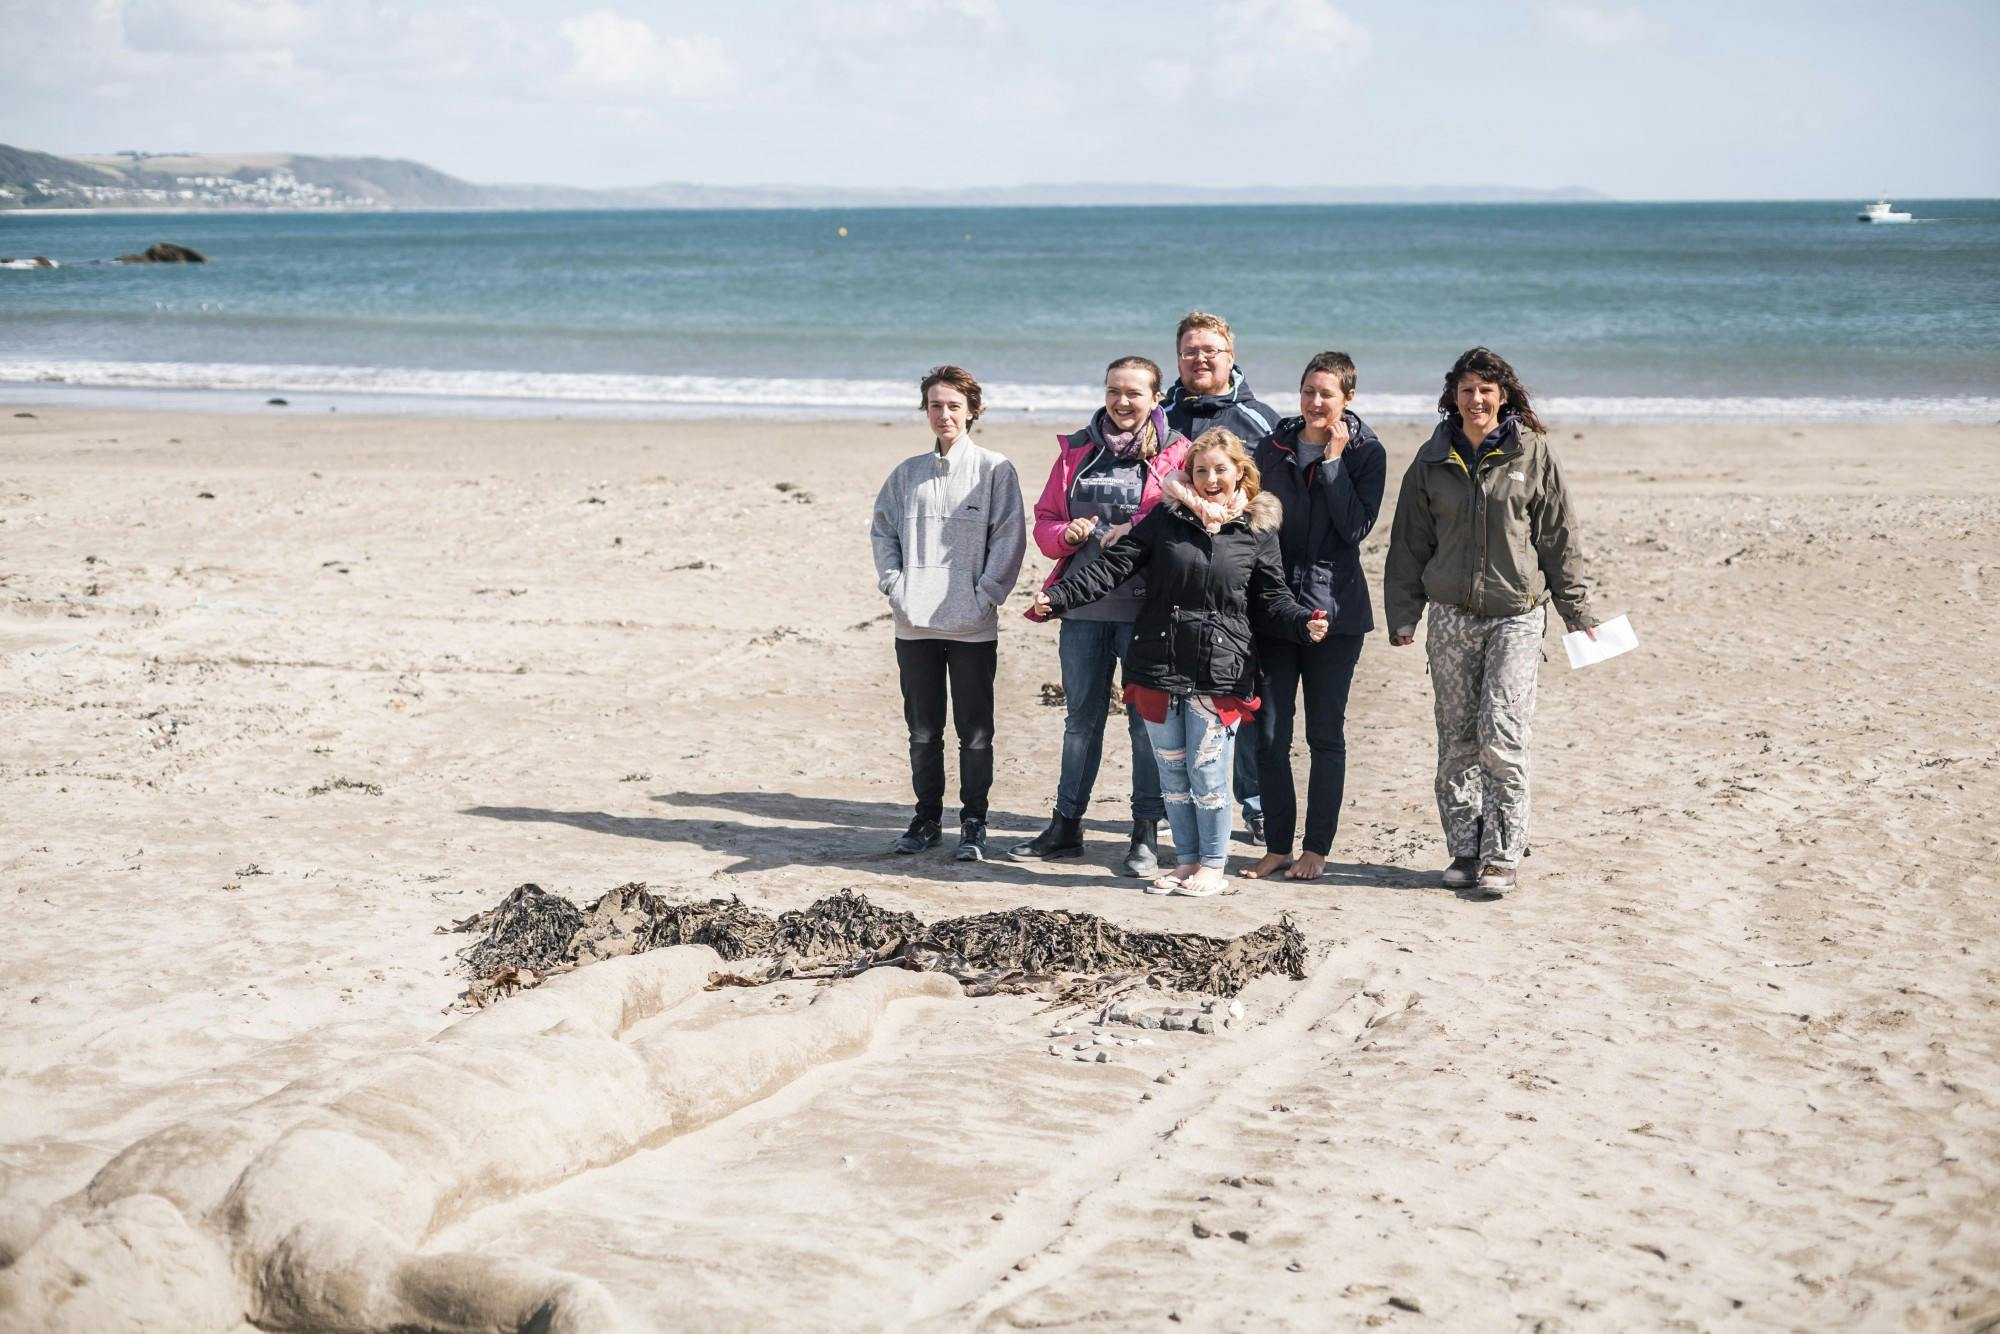 BA Hons Extended Degree students from Plymouth College of Art with their sand sculptures on Looe beach Photo by Taylor Harford